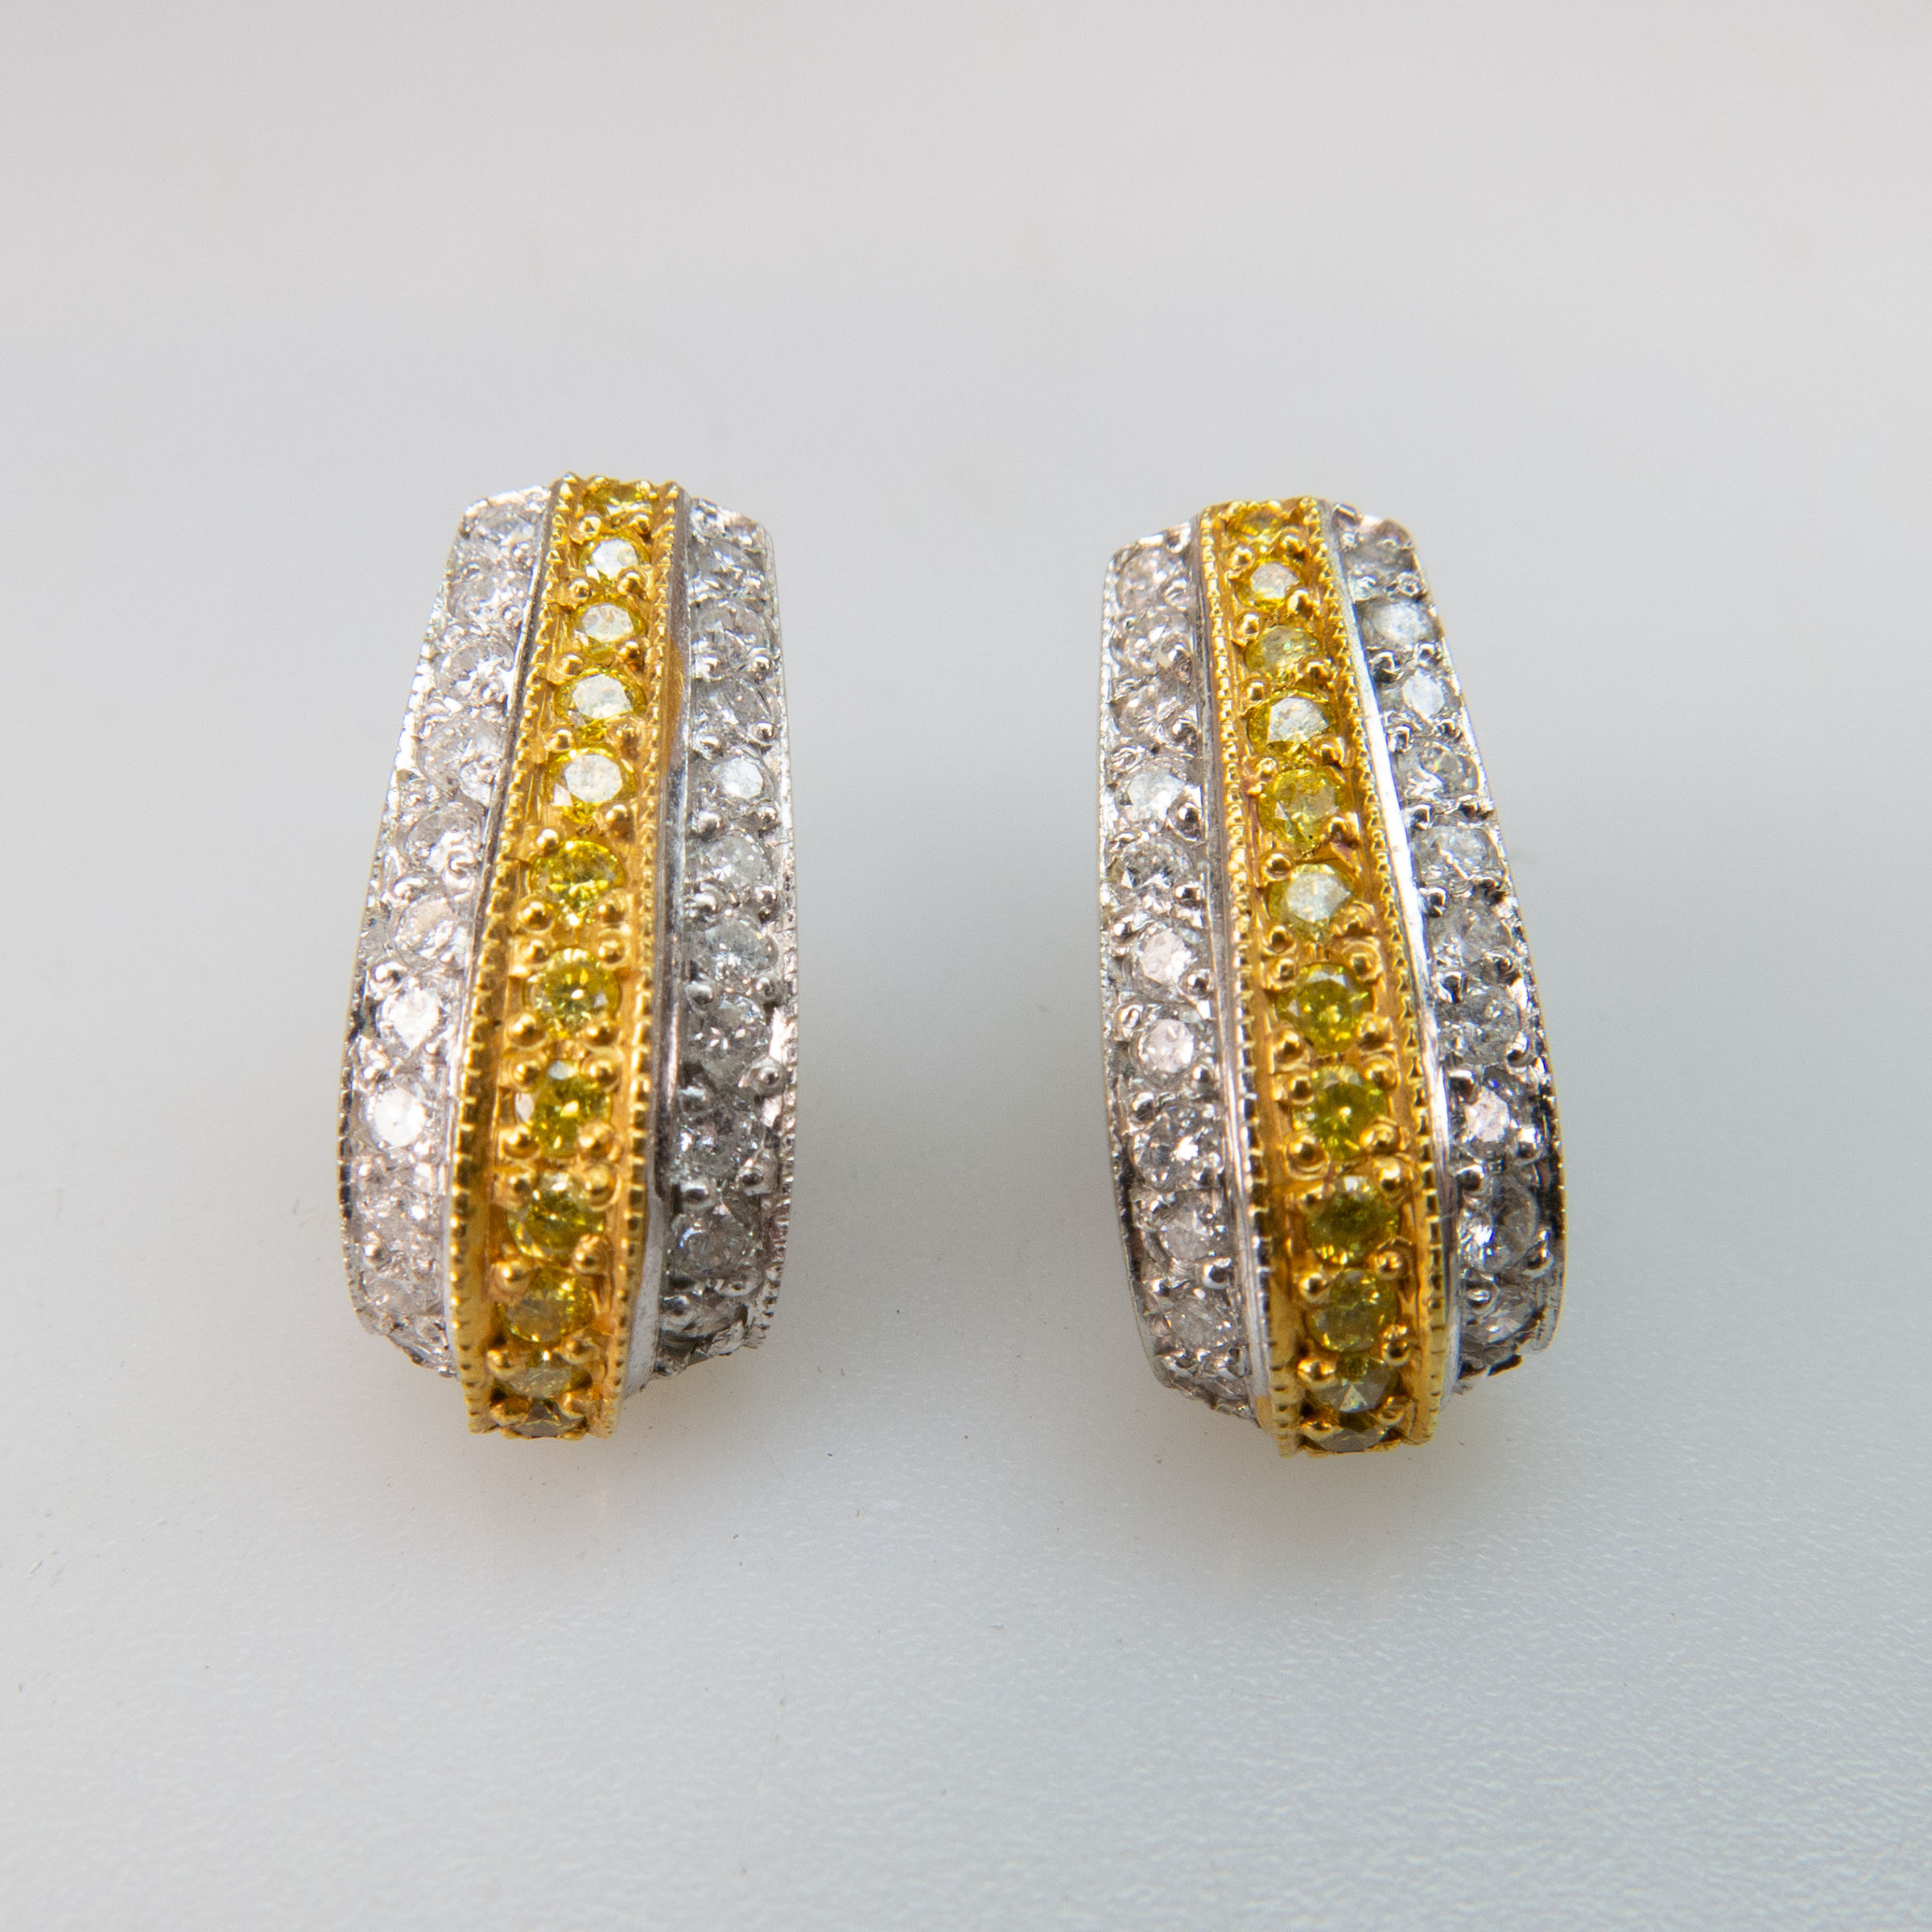 Pair Of 18k White And Yellow Gold Earrings